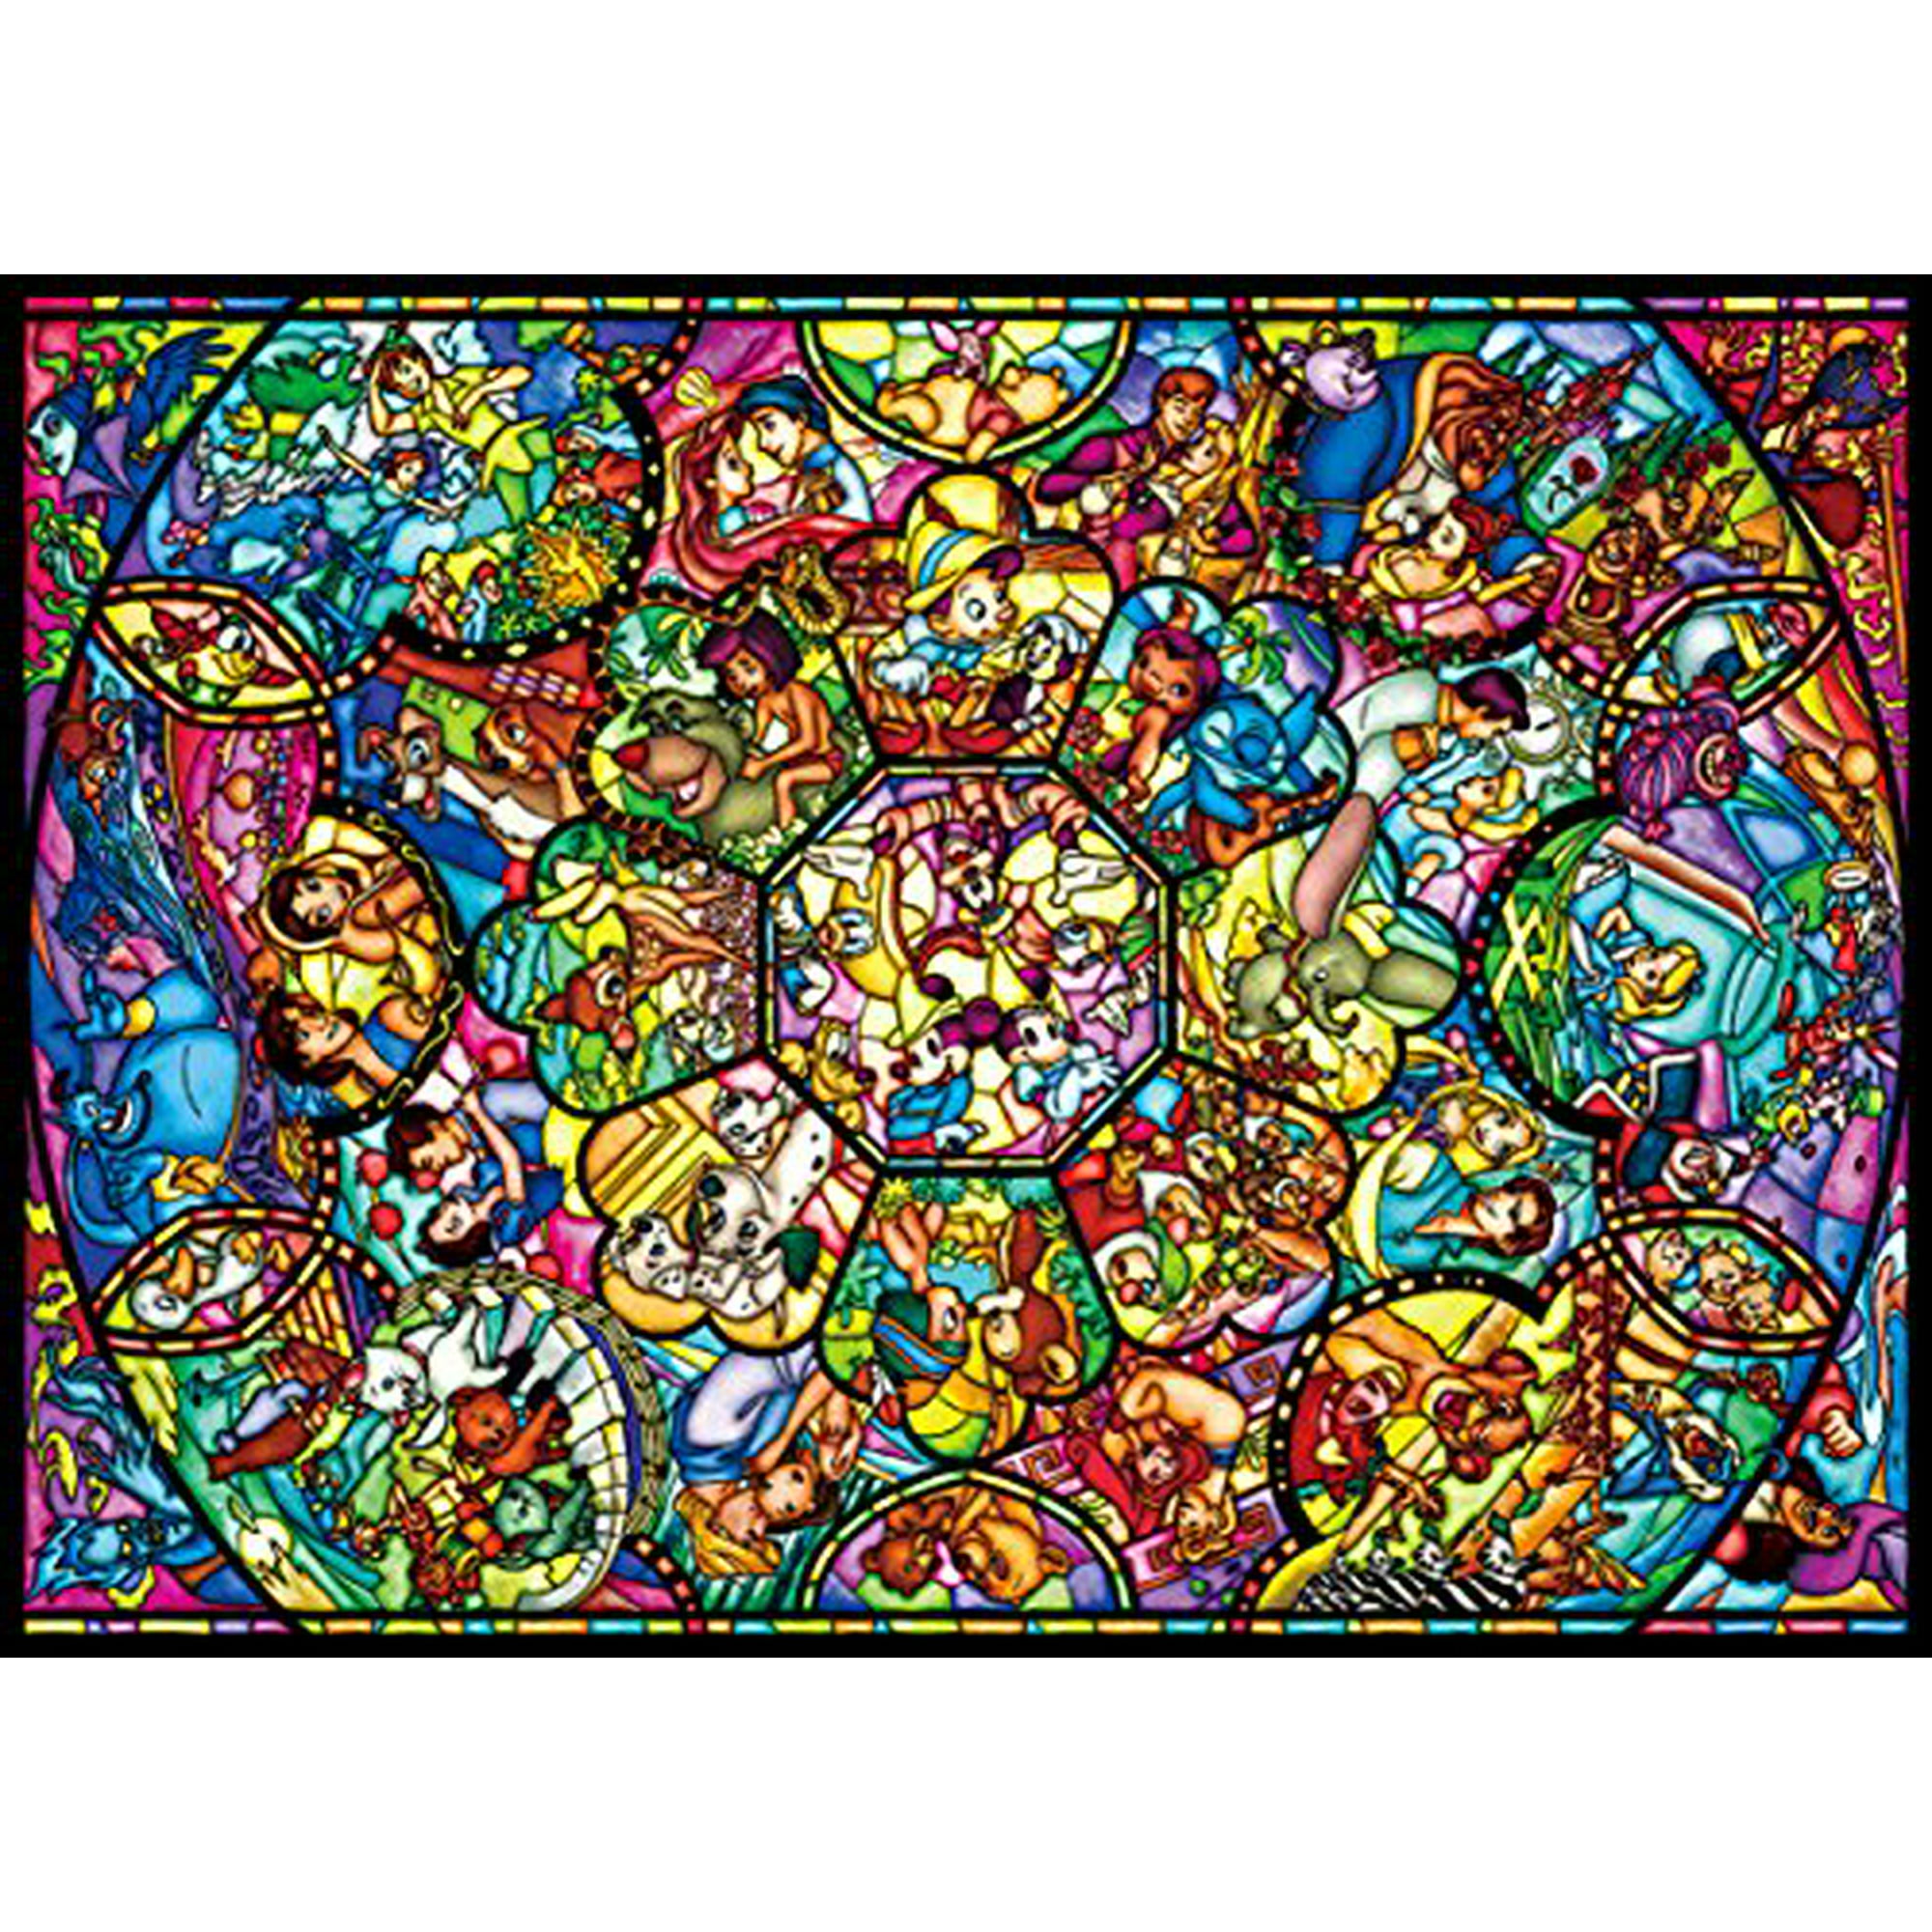 Tenyo Disney All characters Stained glass Jigsaw Puzzle (2000 Piece) |  Walmart Canada